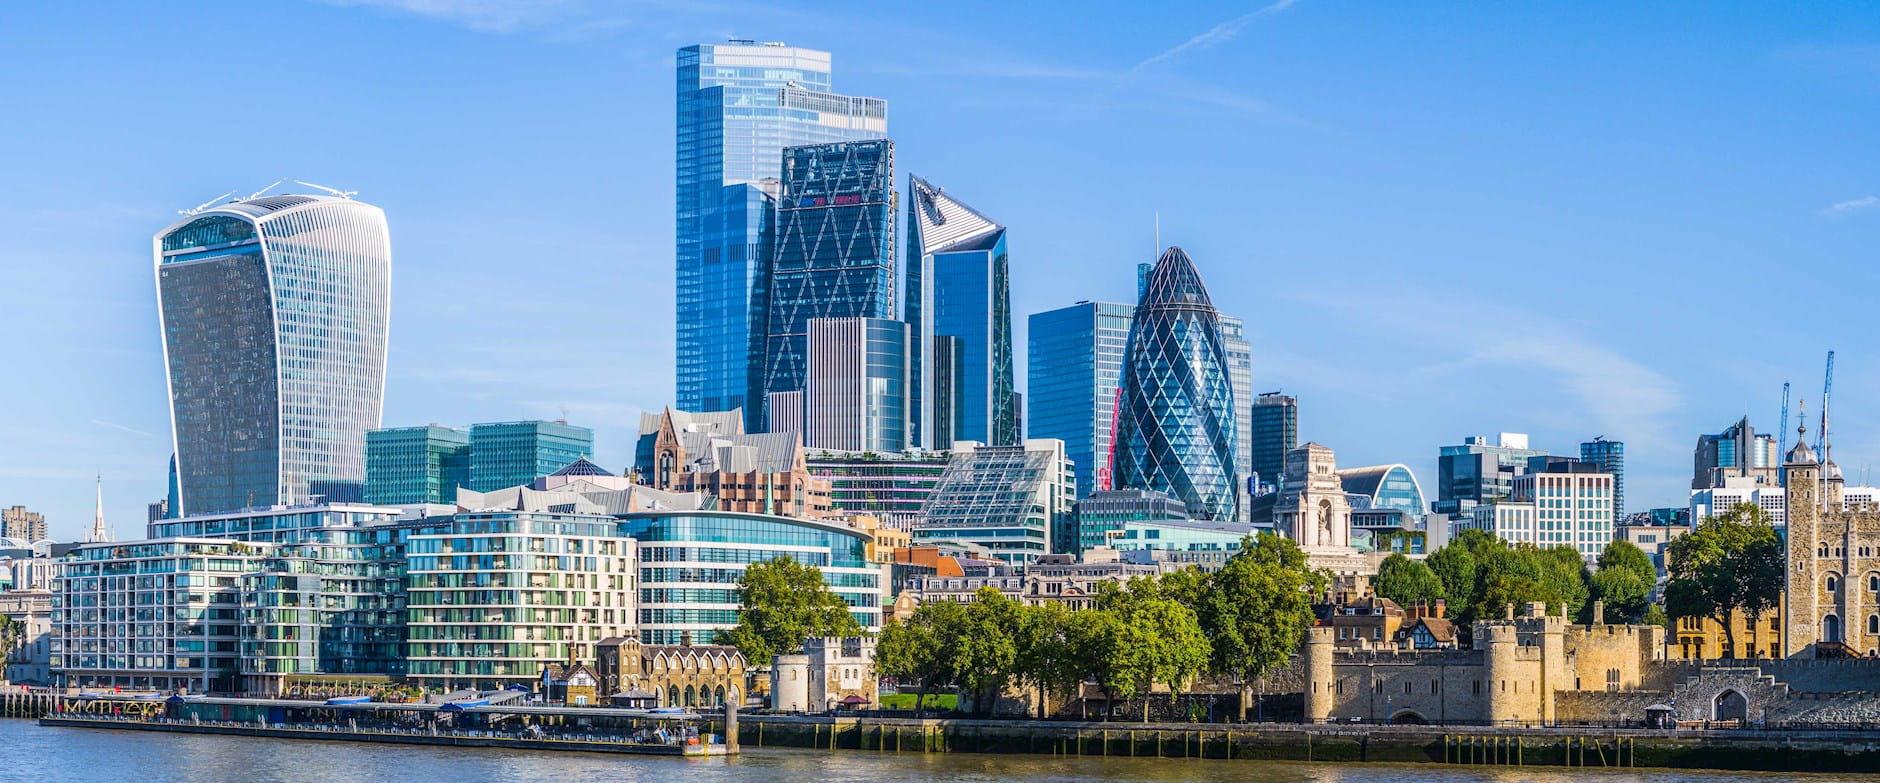 Skyline of the financial district in London